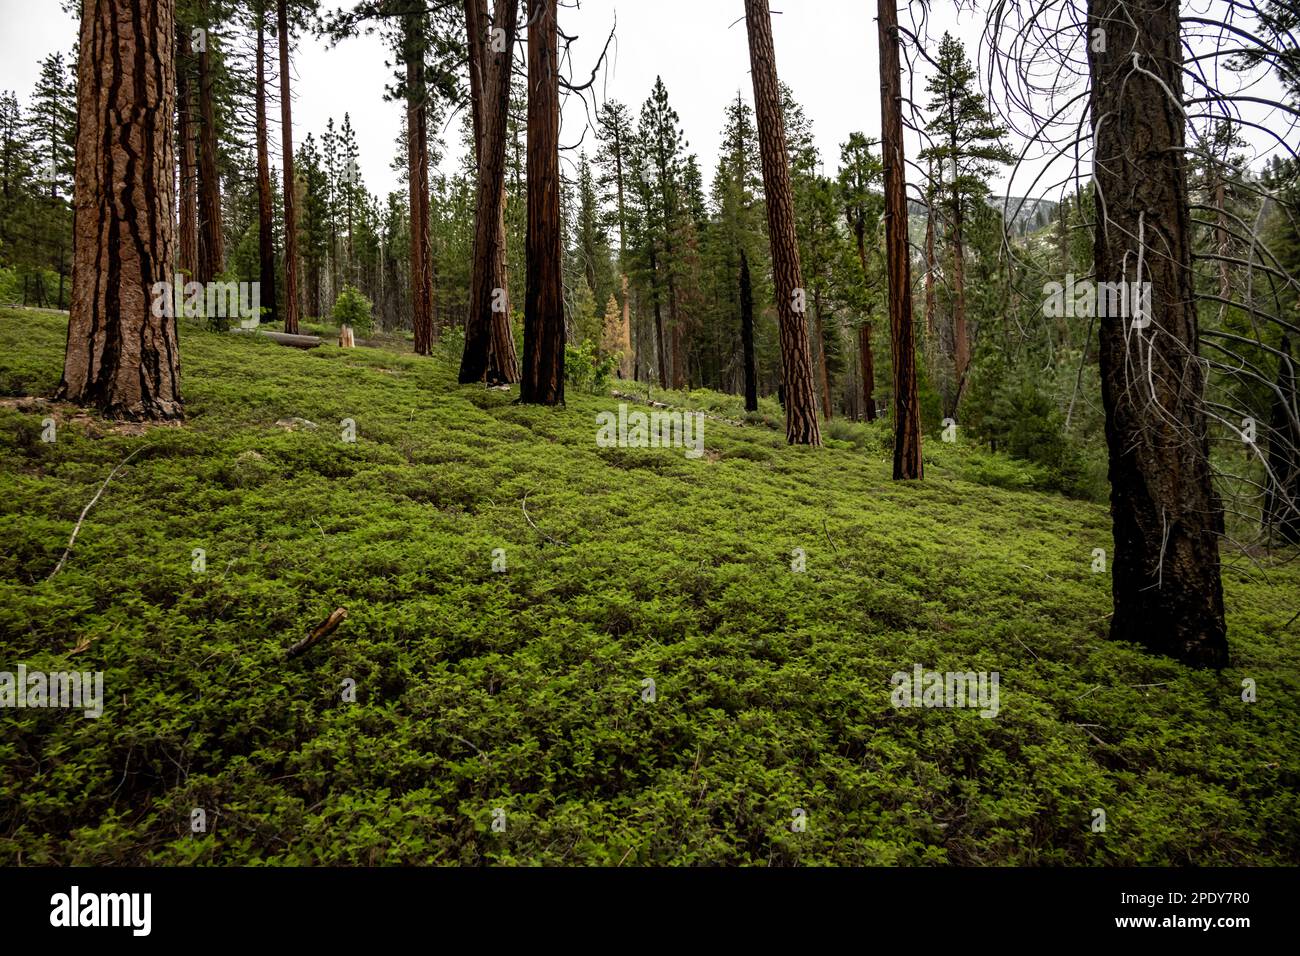 Bright Green Bushes Carpet The Forest Floor Around Lodgepole Pines in Kings Canyon wilderness Stock Photo